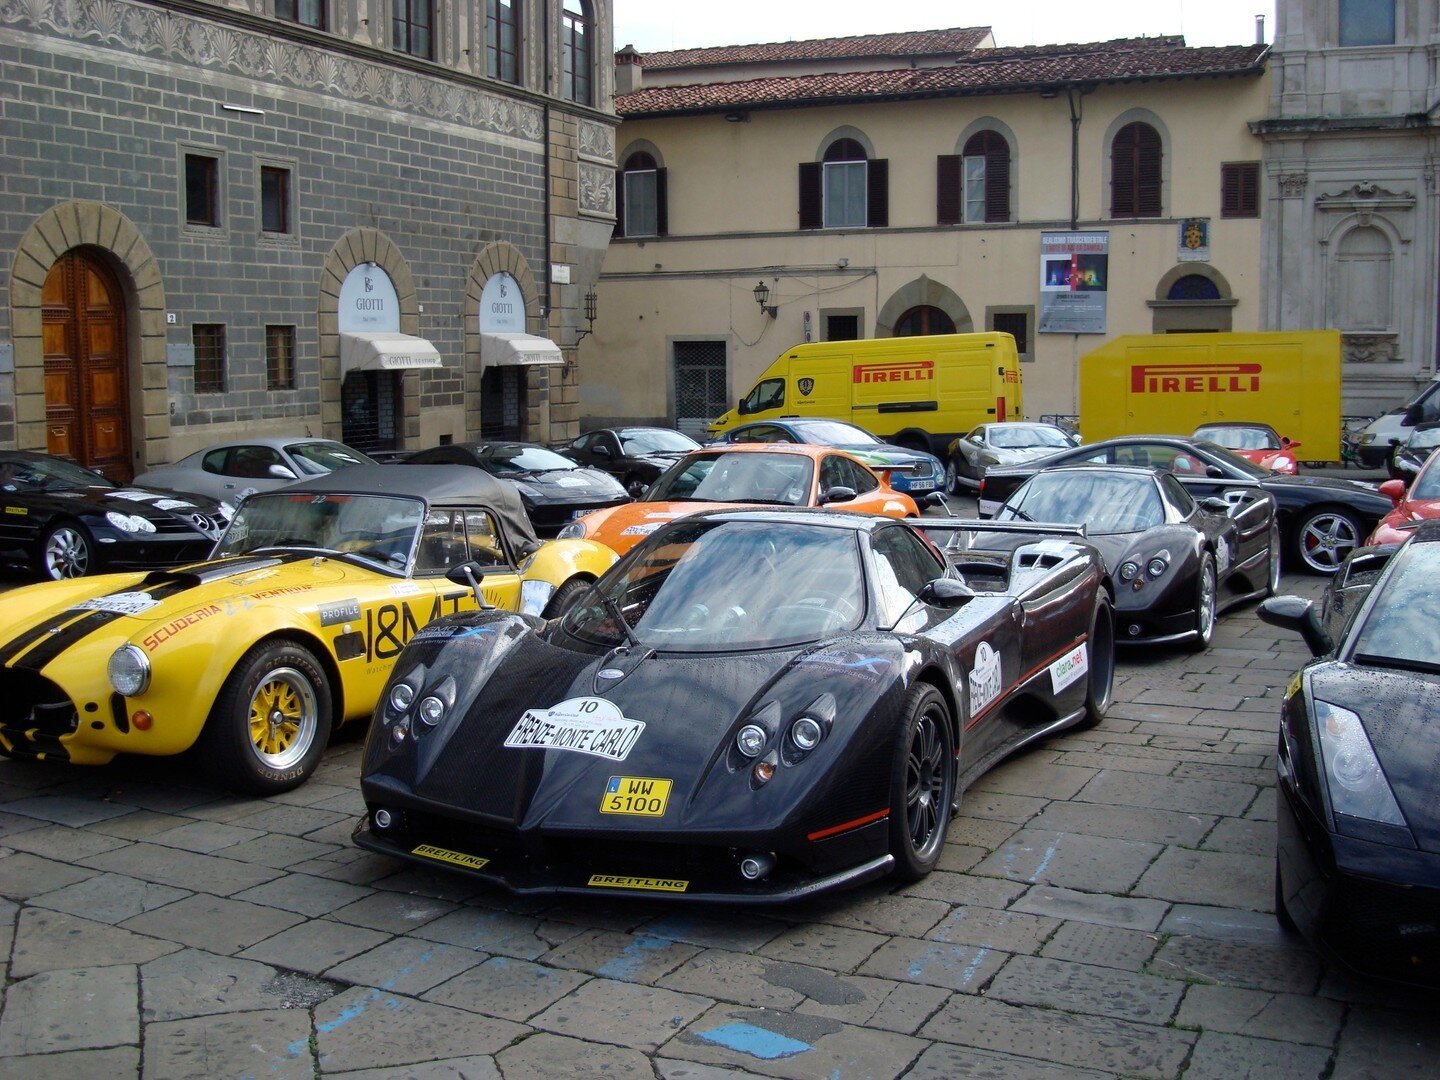 Lovely memories of crossing the start line from the Piazza Ognissanti in Florence with our amazing sponsors @pirelli⁠
⁠
⁠
#supercardriver #supercardriversclub #supercardrivers #supercardriverclub #itswhitenoise #carsofinstagram #supercarseurope #supe